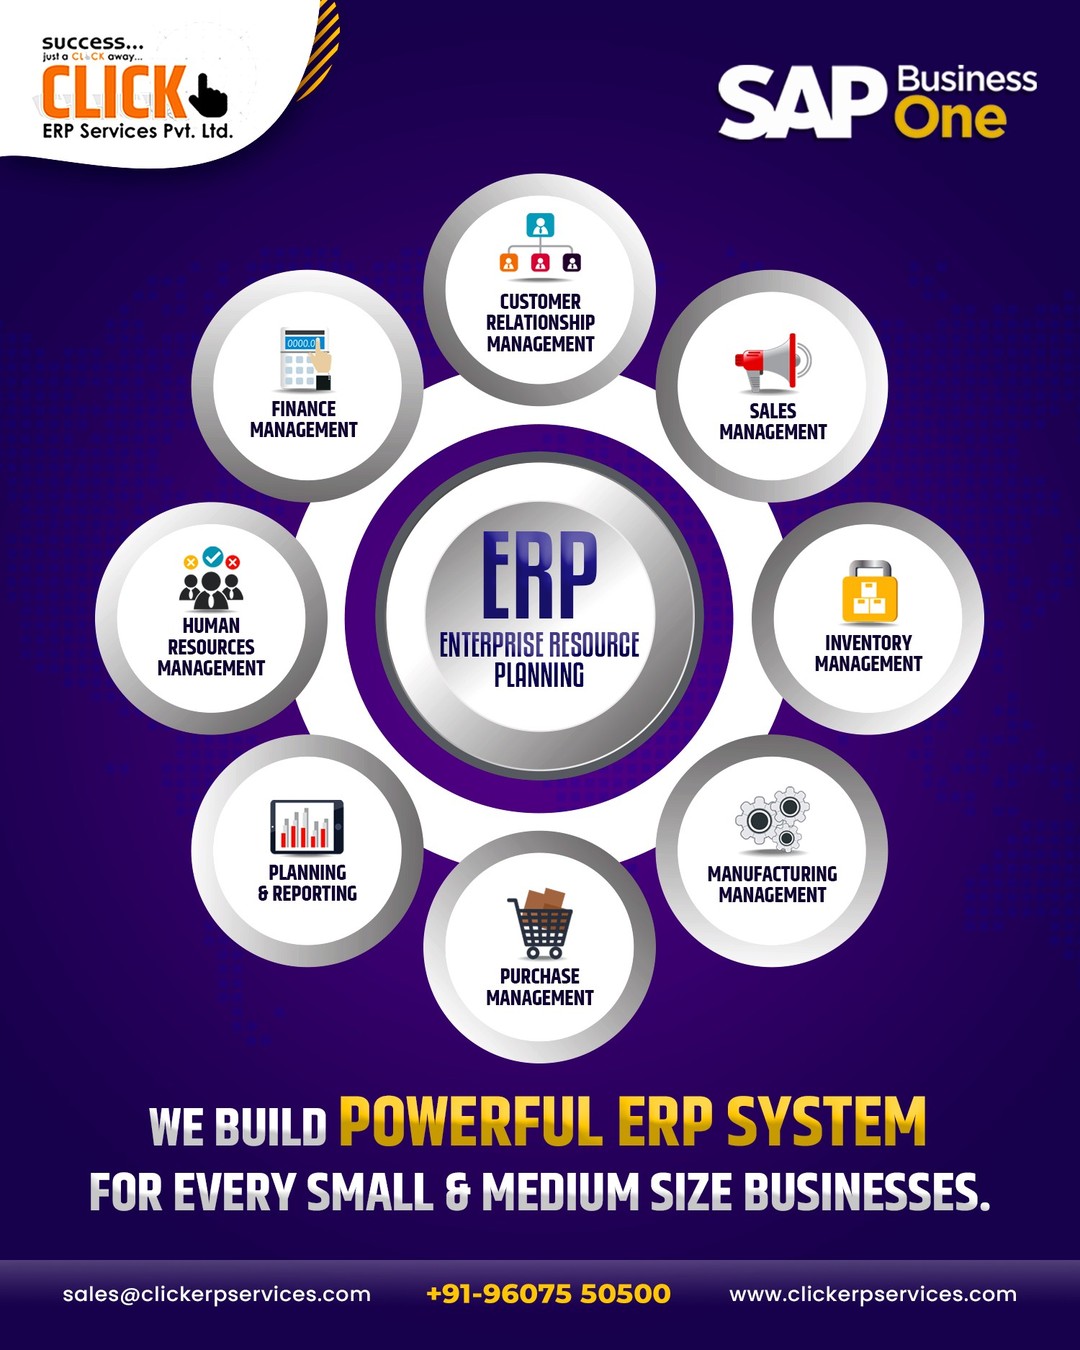 #SAPBusinessOne will take away all your worries with its powerful and dedicated #ERP software which will help your Small & Medium Size Businesses to grow. 
.
✅ Customer Relationship Management
✅ Finance Management
✅ Human Resources Management
✅ Sales Management
✅ Inventory Management
✅ Manufacturing Management
✅ Purchase Management
✅ Planning & Reporting
.
Get In Touch for more information:
☎️ Call Us: +91-9607550500
📨 E-mail Us: sales@clickerpservices.com
🖱 Visit Us: www.clickerpservices.com
.
#ClickERPServices #startup #erpsoftware #SAPBusinessOne #SAPB1 #AffordableERP #ERPforSME #smallbusinesschallenge #smallbusiness #smallbusinesssupport #smallbusinessowner #clouderpsoftware #erpsolutions #erpintegration #smallbusinessstartup #startupgrowth #smallbusinesssolutions #saperp #clouderp #onlinesoftware #lowcostautomation